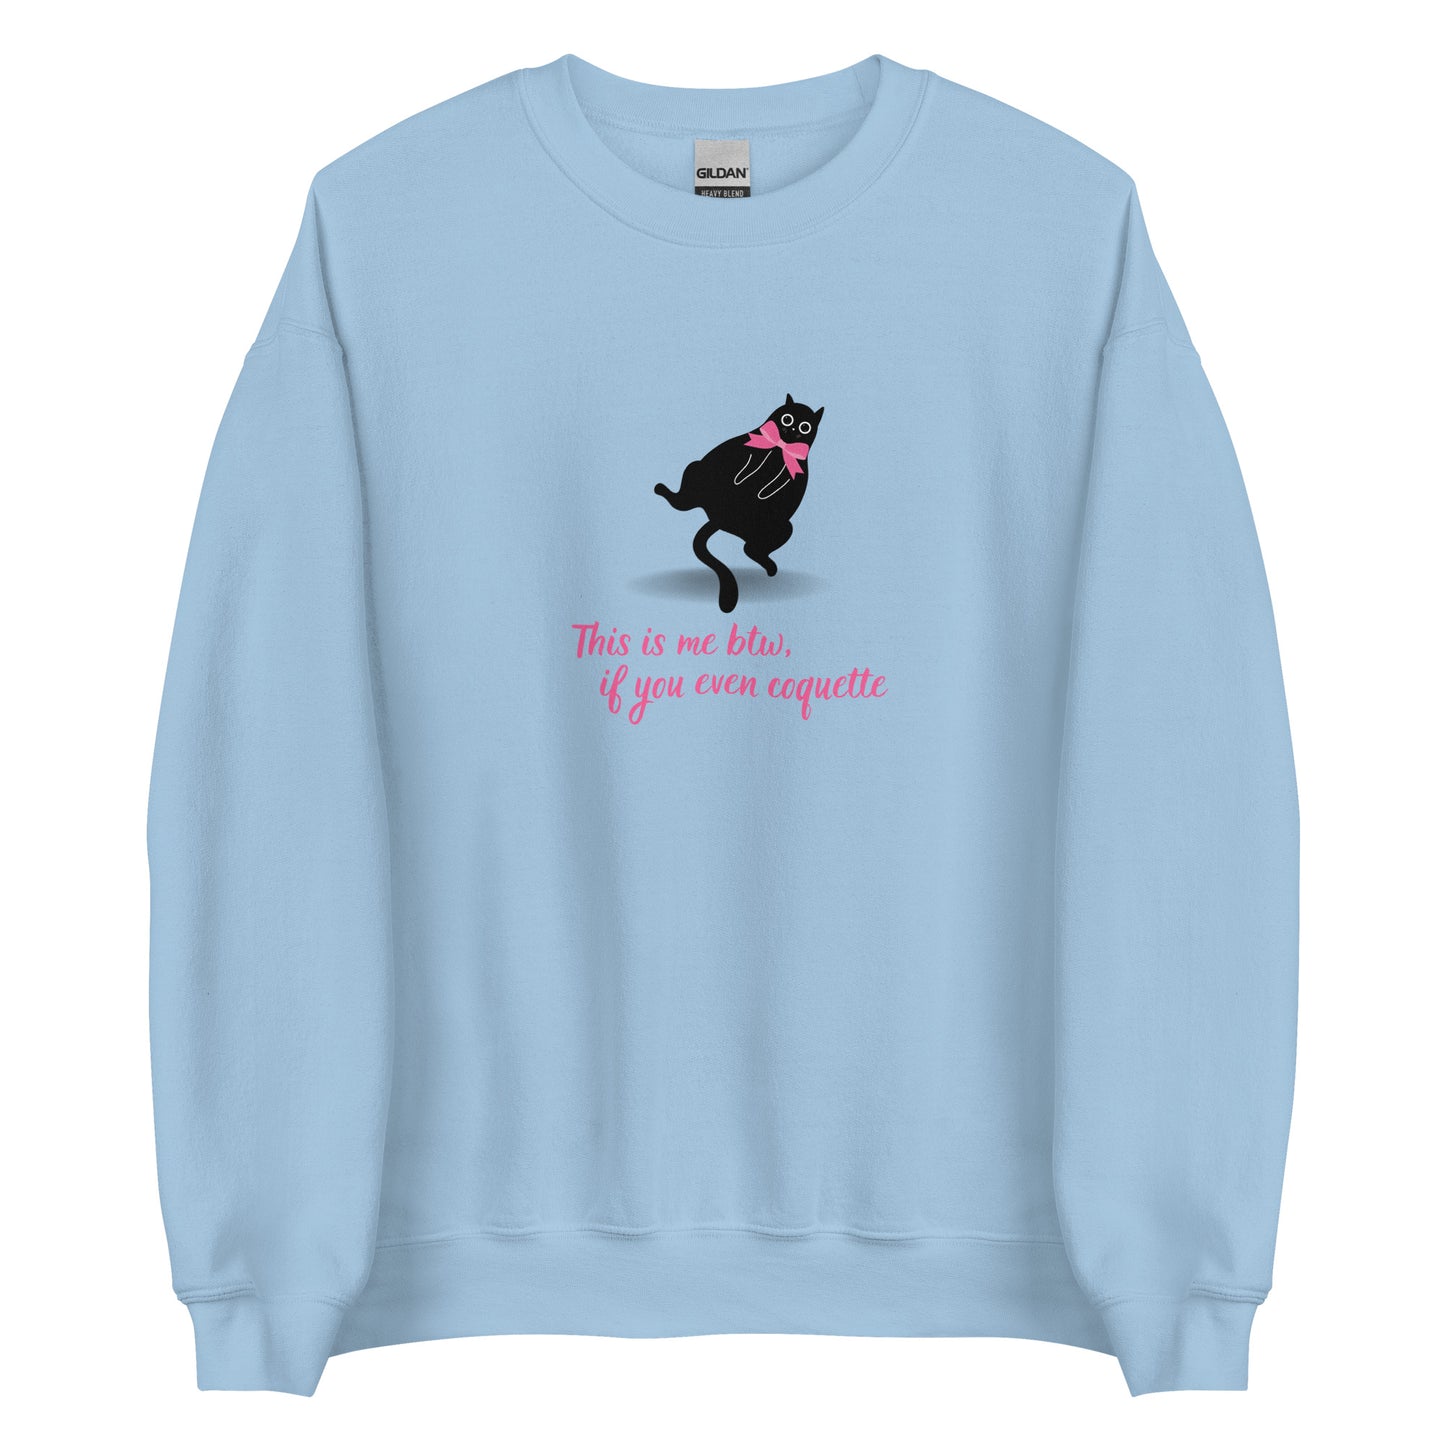 Coquette Sweatshirt, This Is Me Btw, If You Even Care/Coquette Meme, Pink Bow Black Cat, Coquette Aesthetic